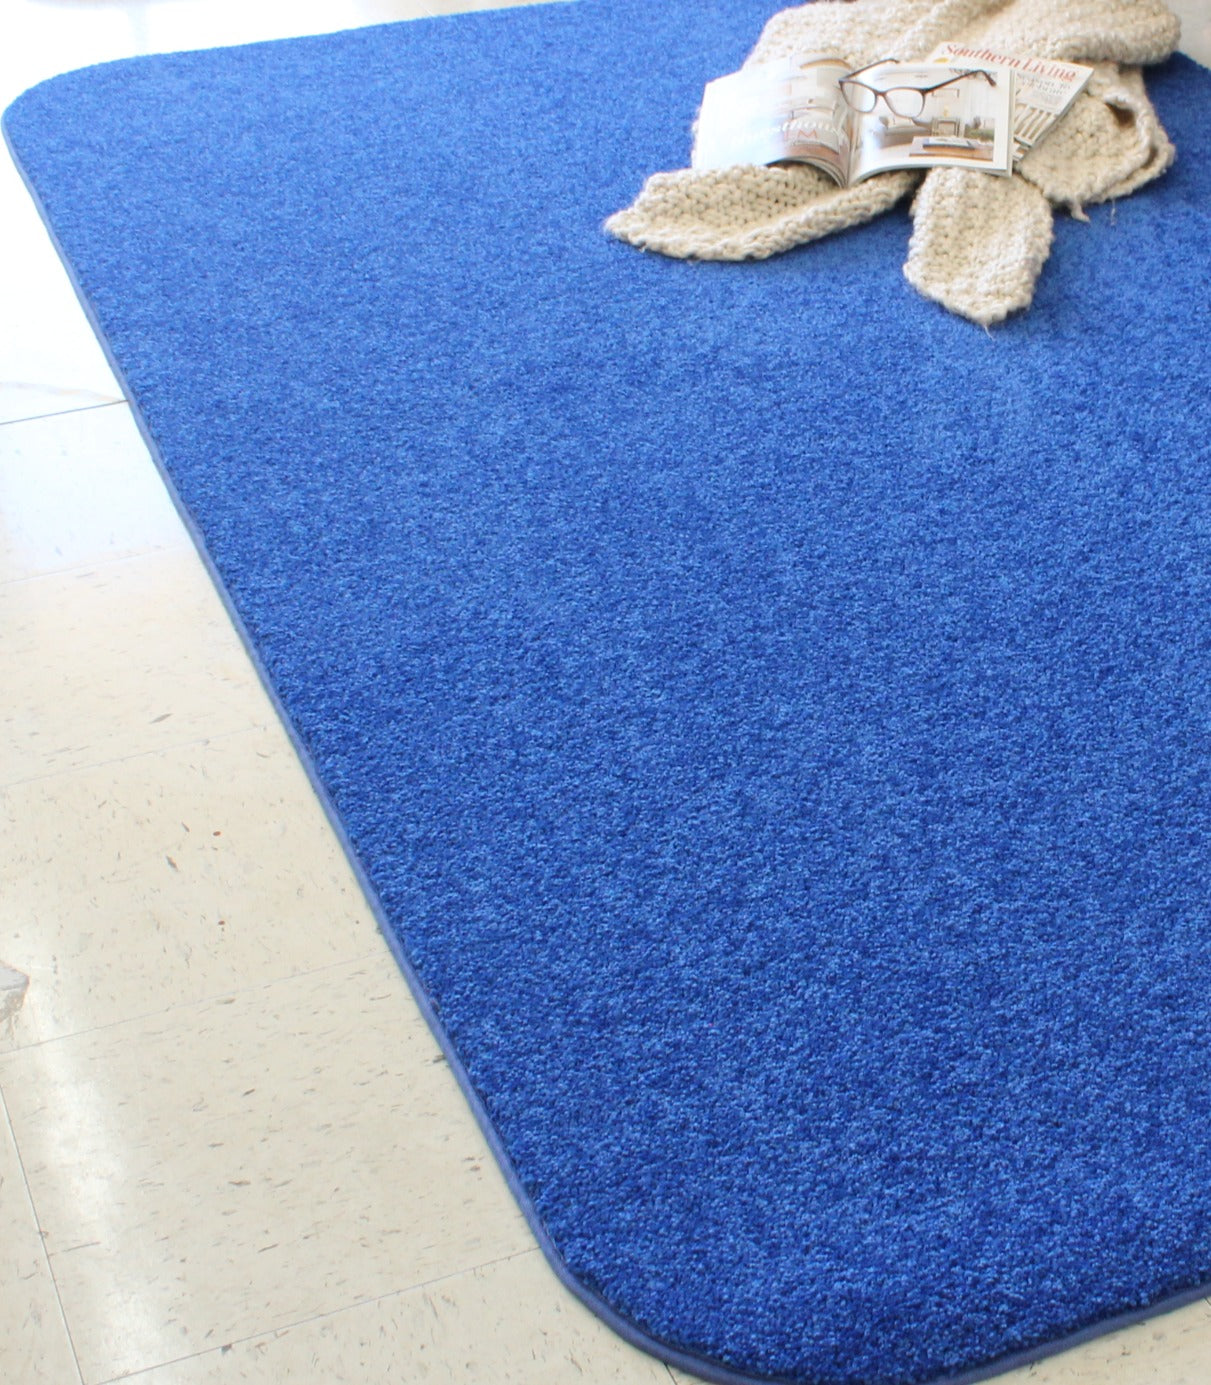 Royal Blue Area Rug under book and glasses